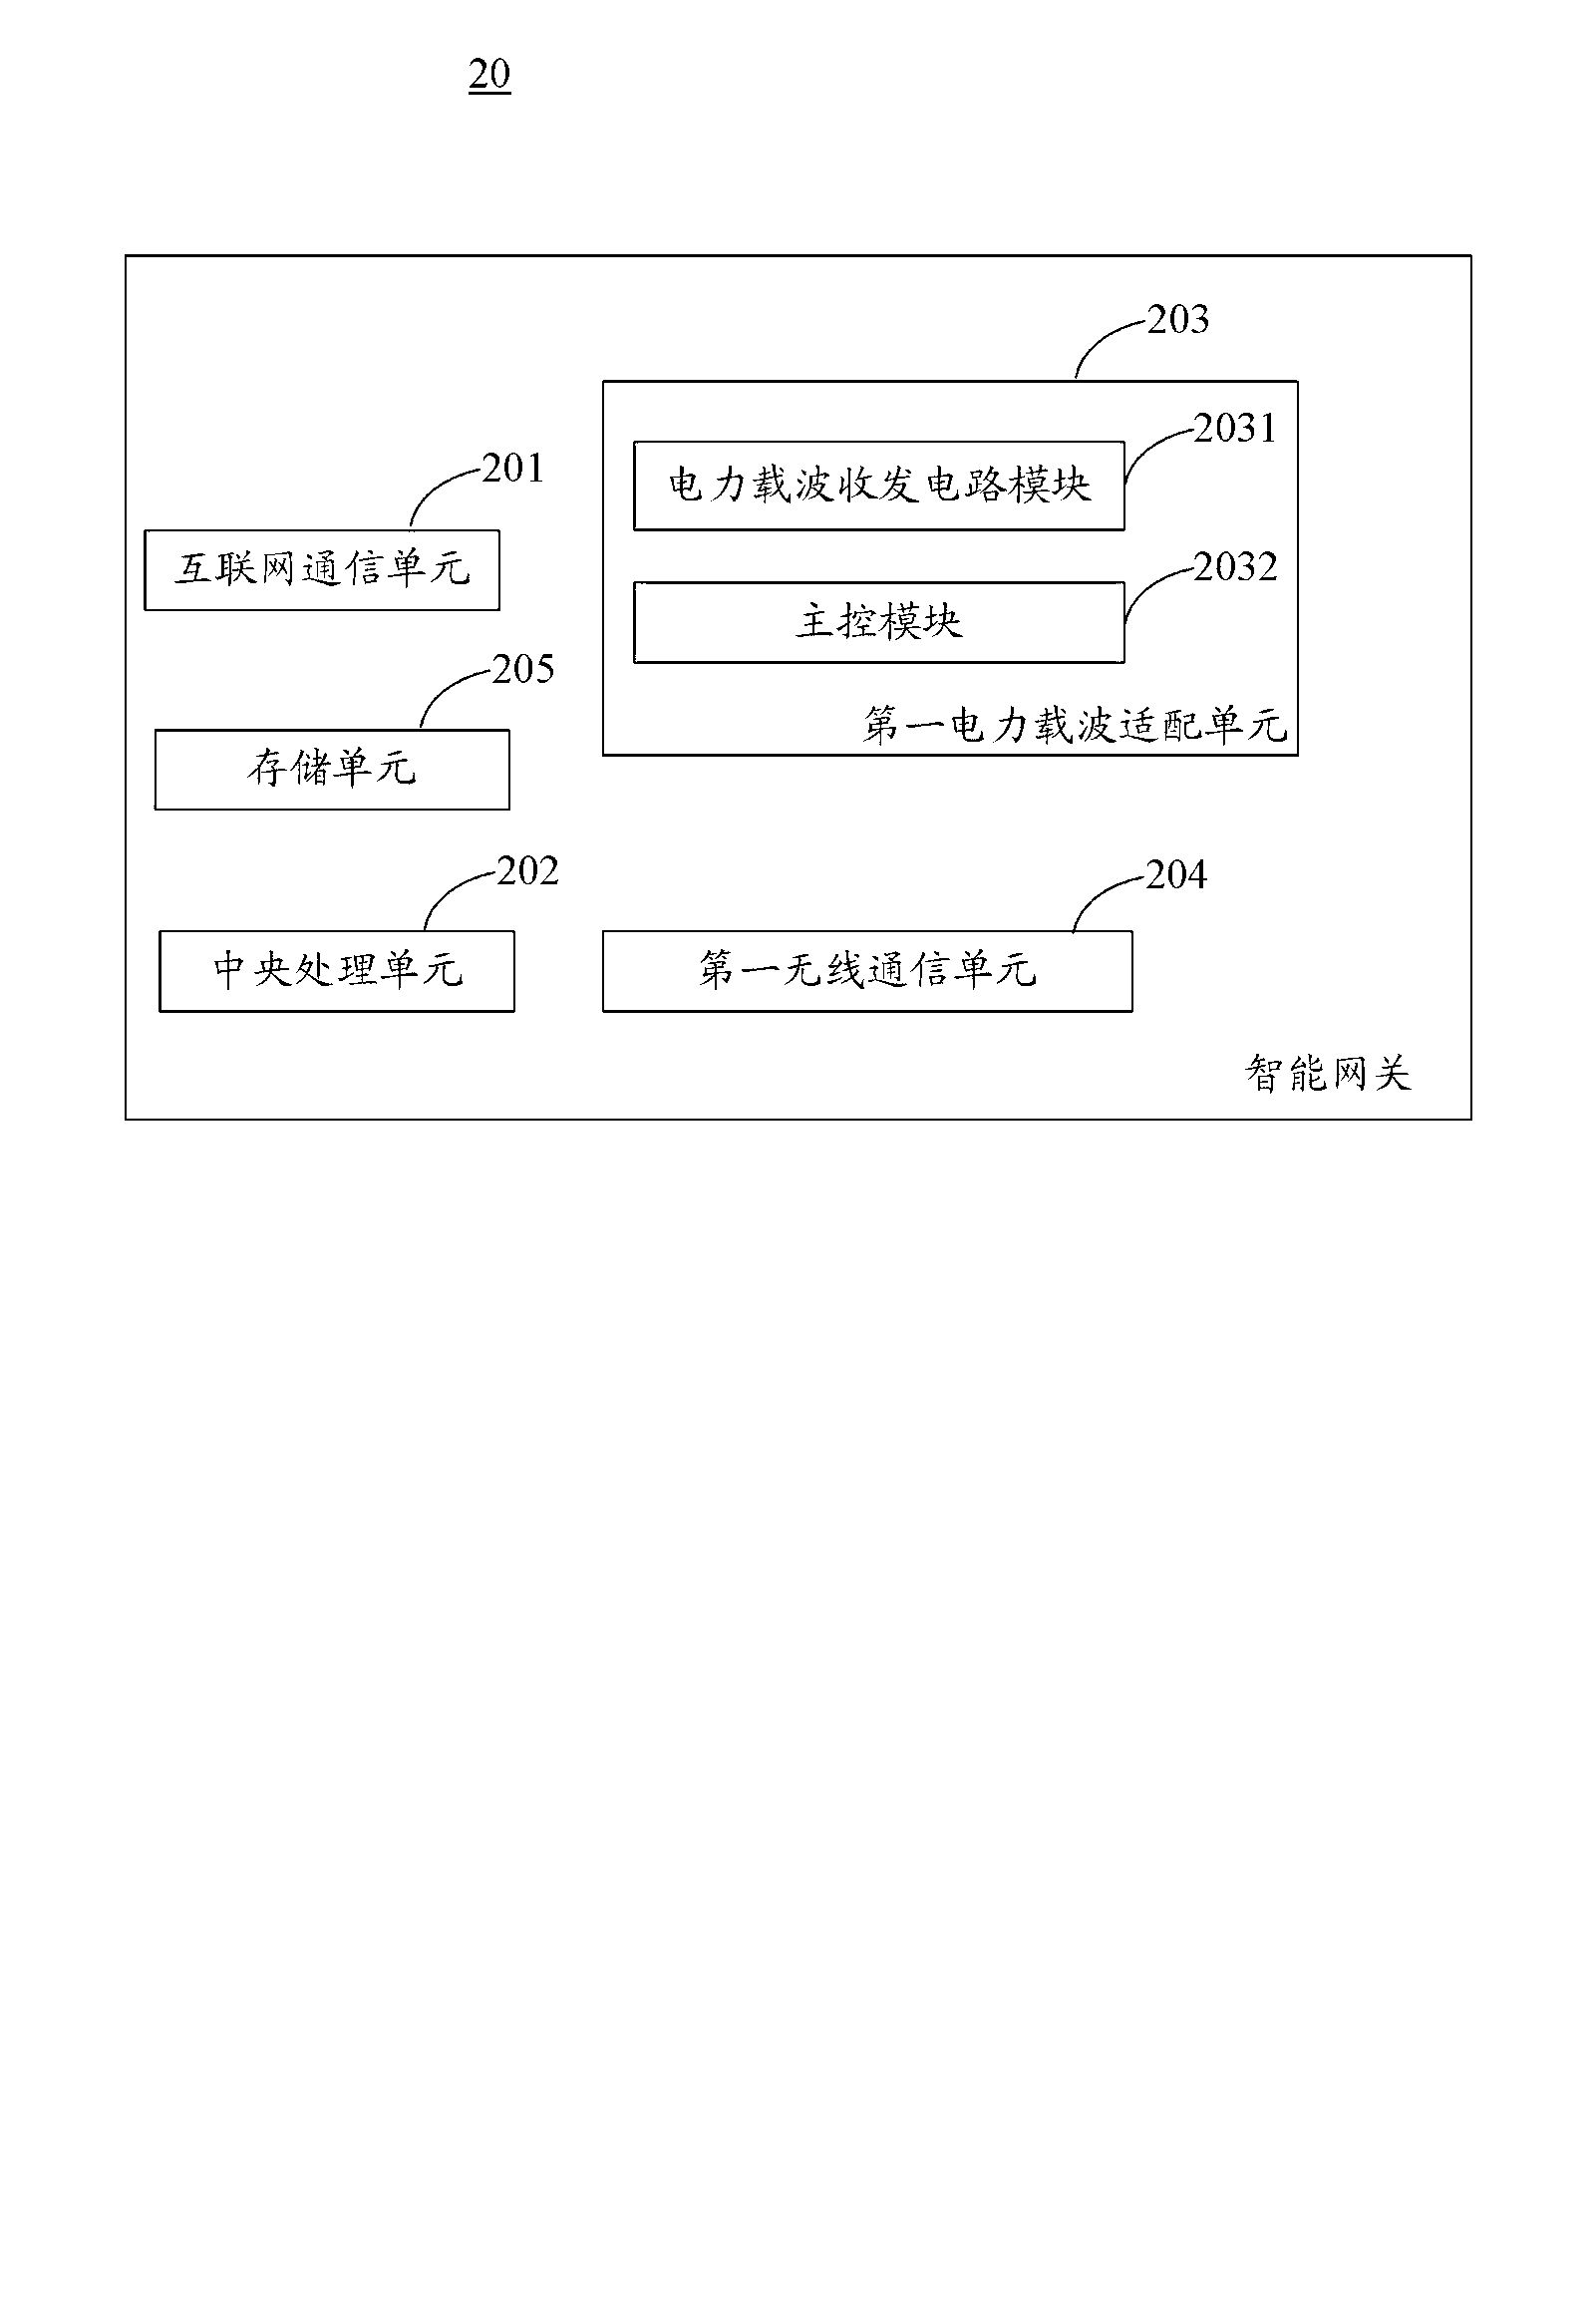 Remote control method for intelligent gateway, intelligent home system and appliances